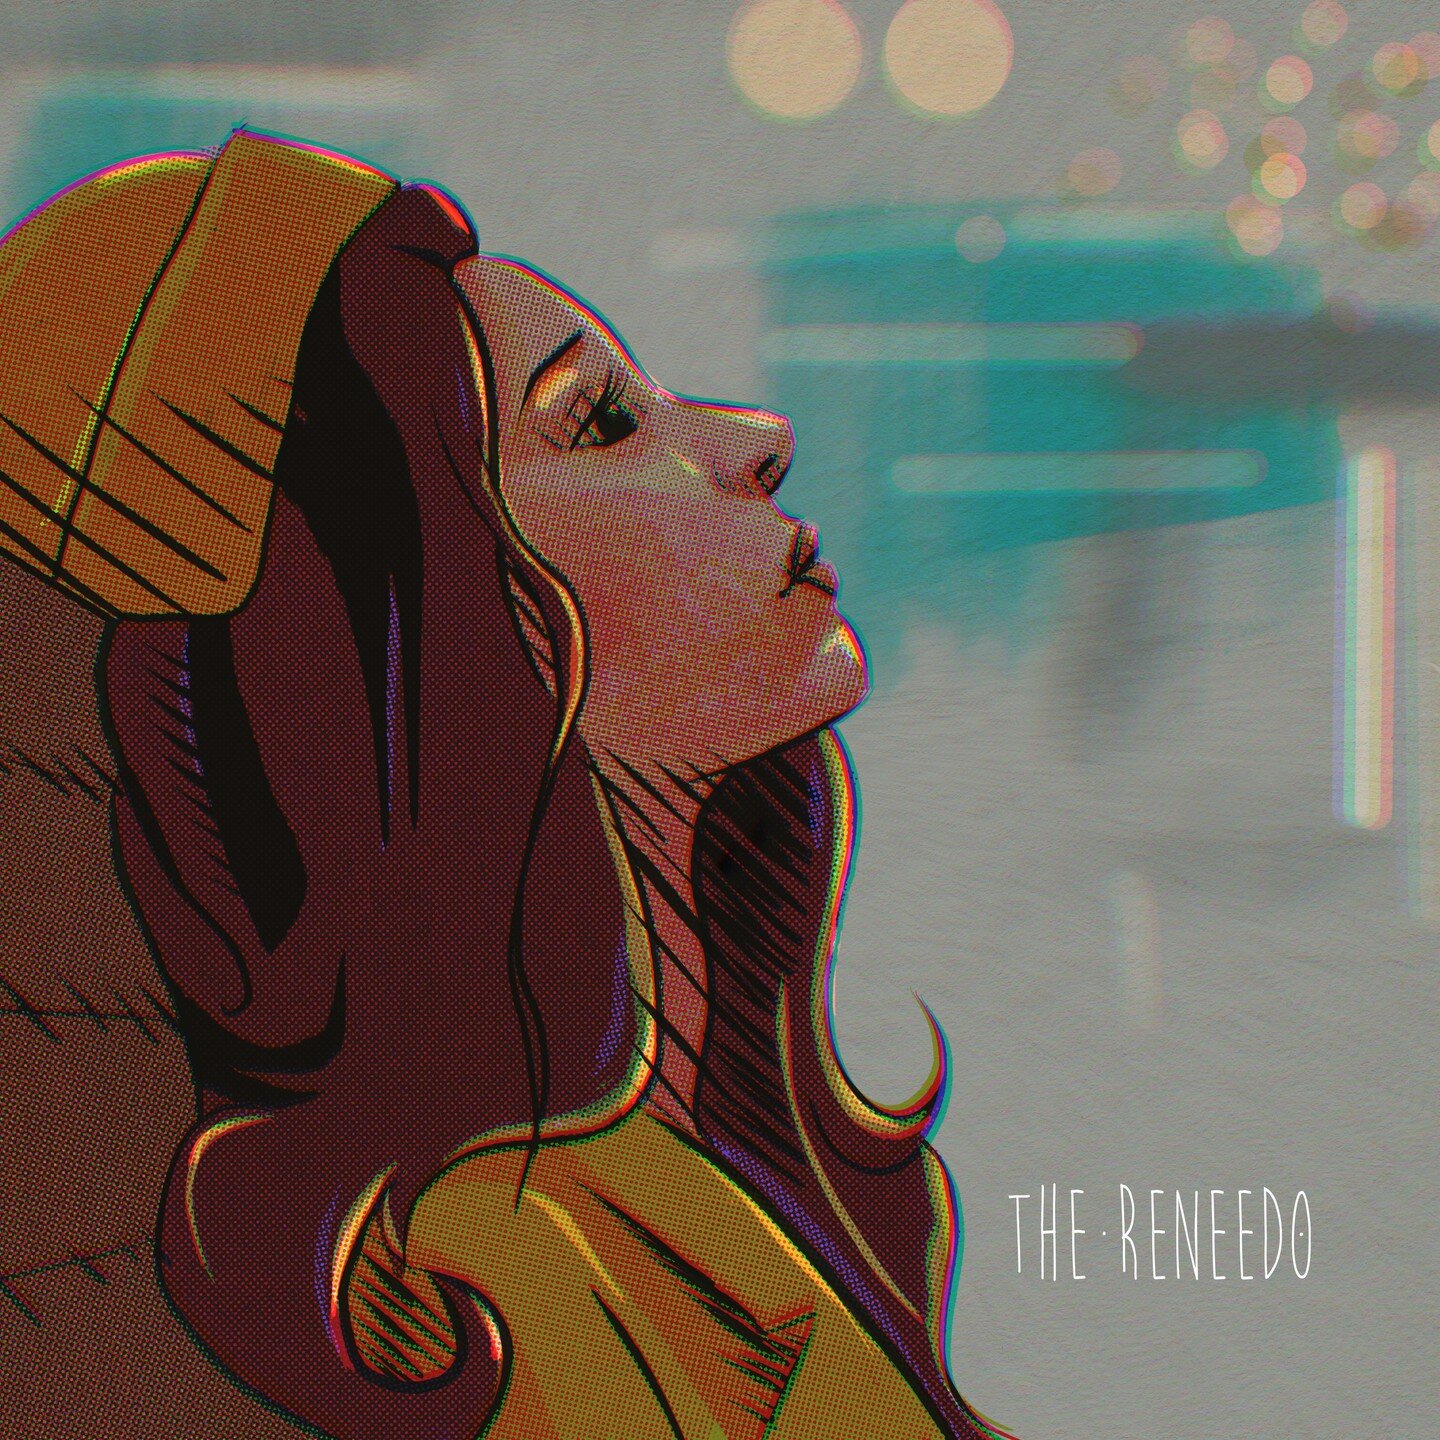 Feeling some fall melancholy. Just a some halftone practice from reference. 

#illustration #fallvibes #halftones #popart #igartists #digitalpainting #artistoninstagram #digitalart #characterart #colorfulart #artprocess #drawingfromreference